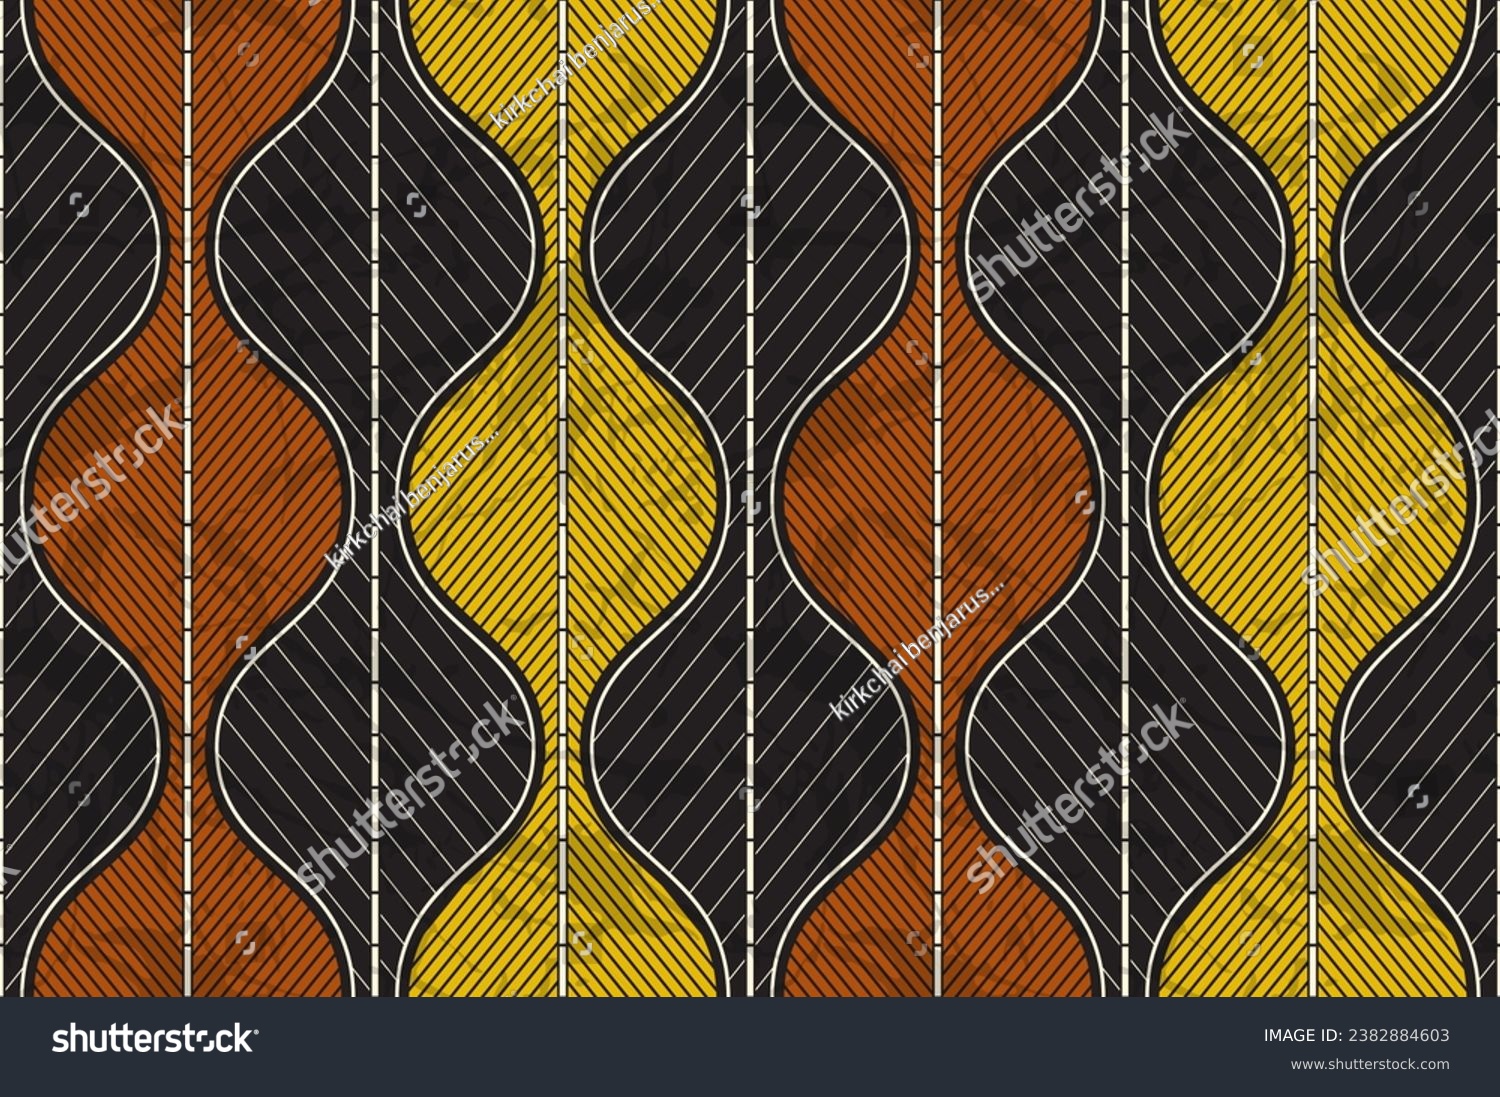 SVG of Contemporary African Tribal Abstract Textile Art, Vibrant Colors for Inspire Modern Fashion Statements and Ethnic Cultural Fusion Patterns,  Straight lines and Curves Design svg